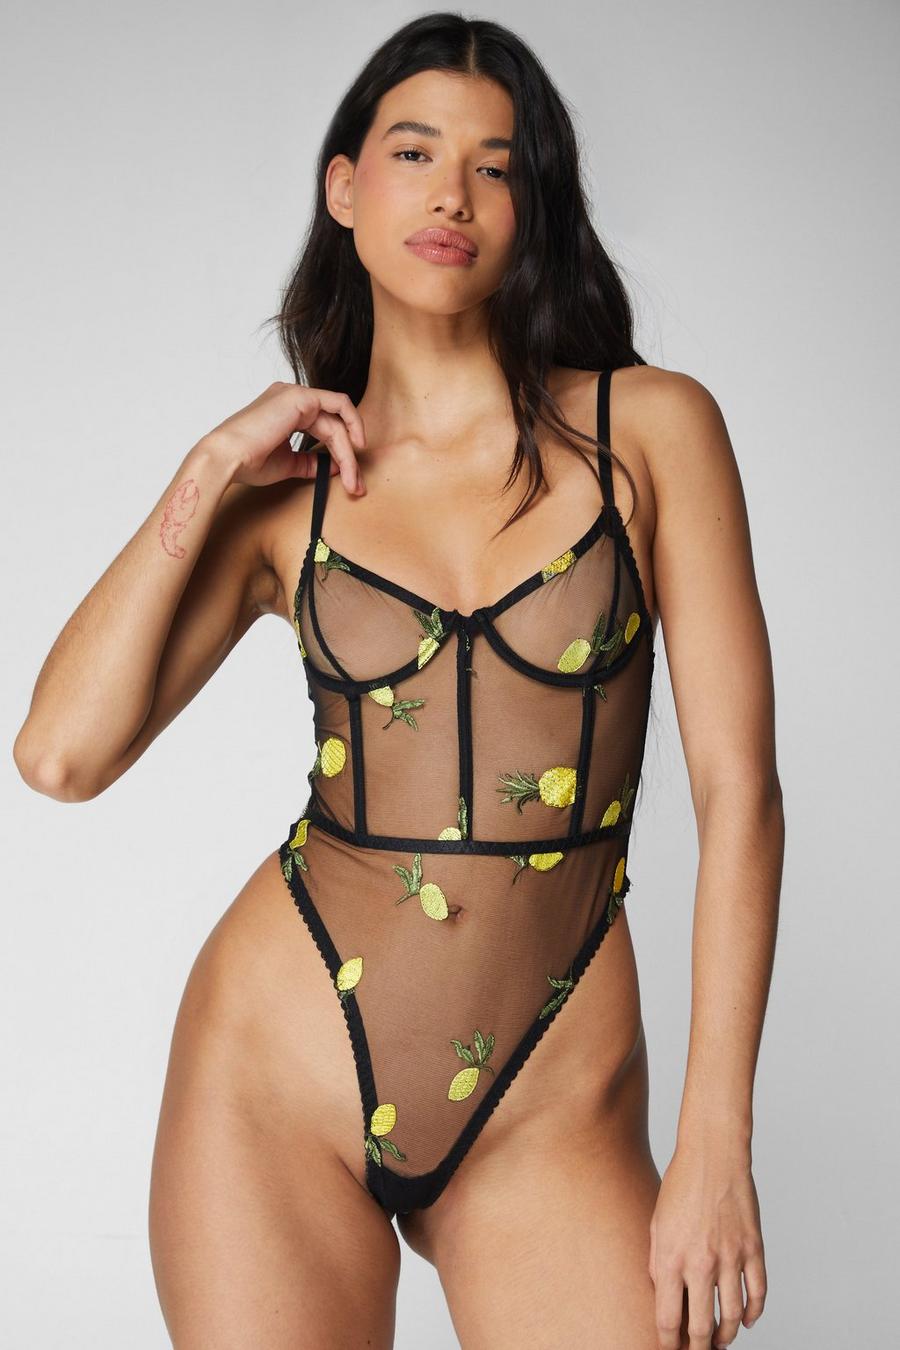 Black Lemon and Pineapple Embroidered Underwire Lingerie Bodysuit